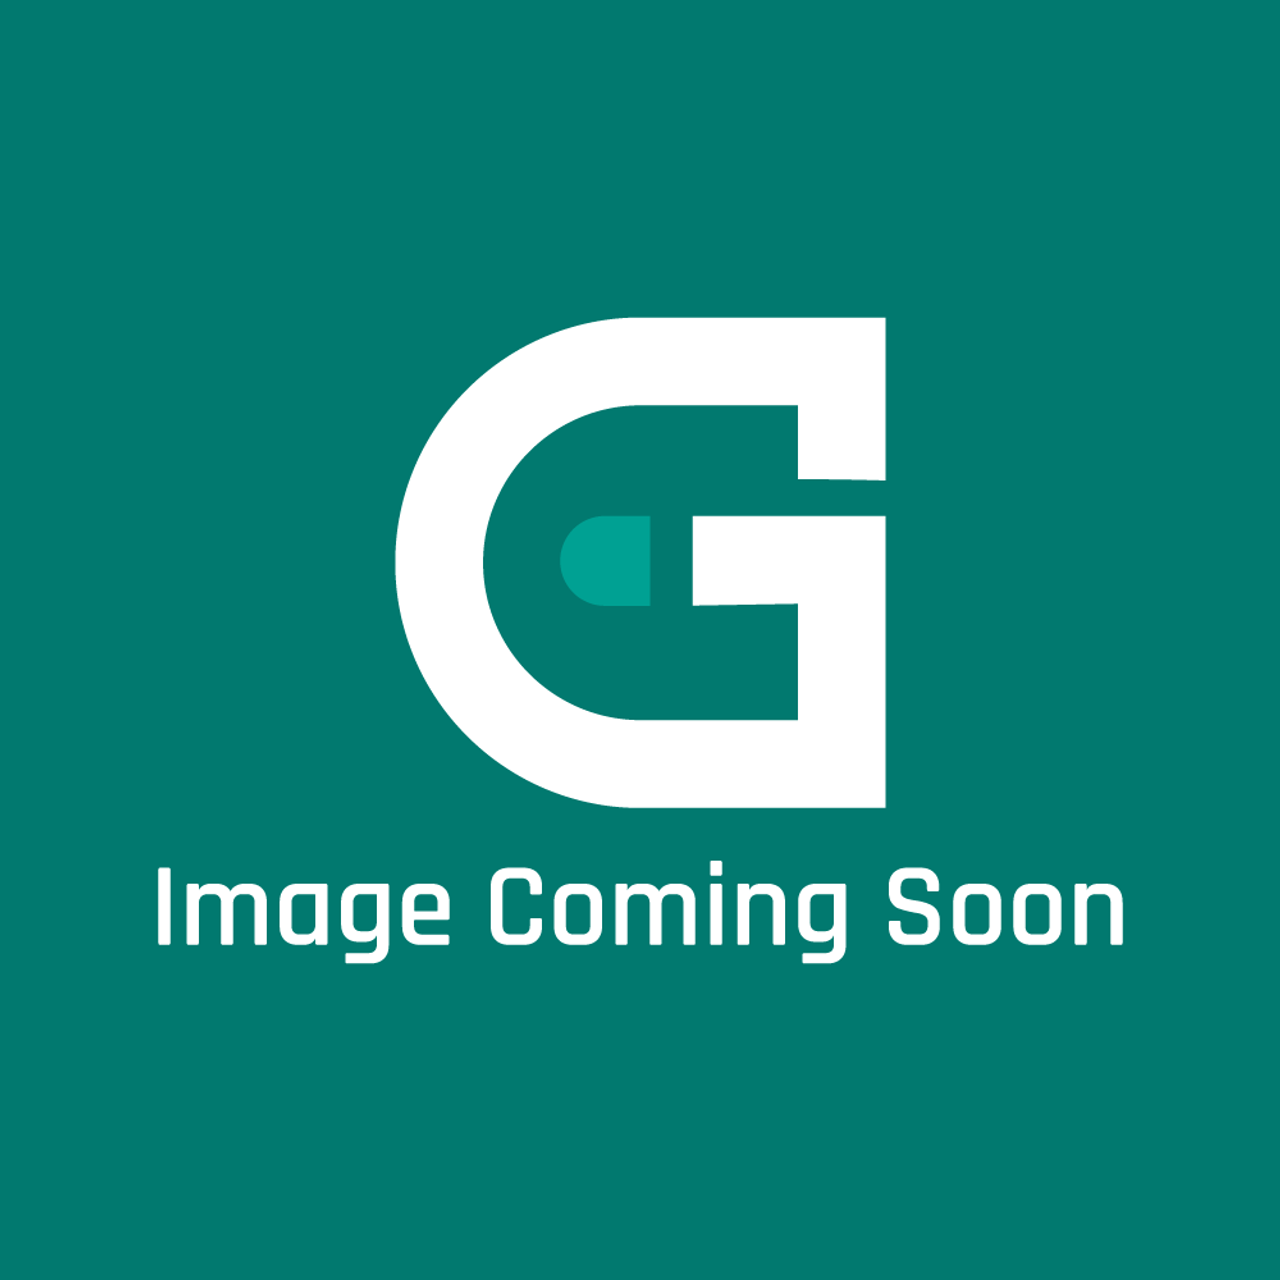 GE Appliances WR13X38945 - Hinge Mounting Plate - Image Coming Soon!